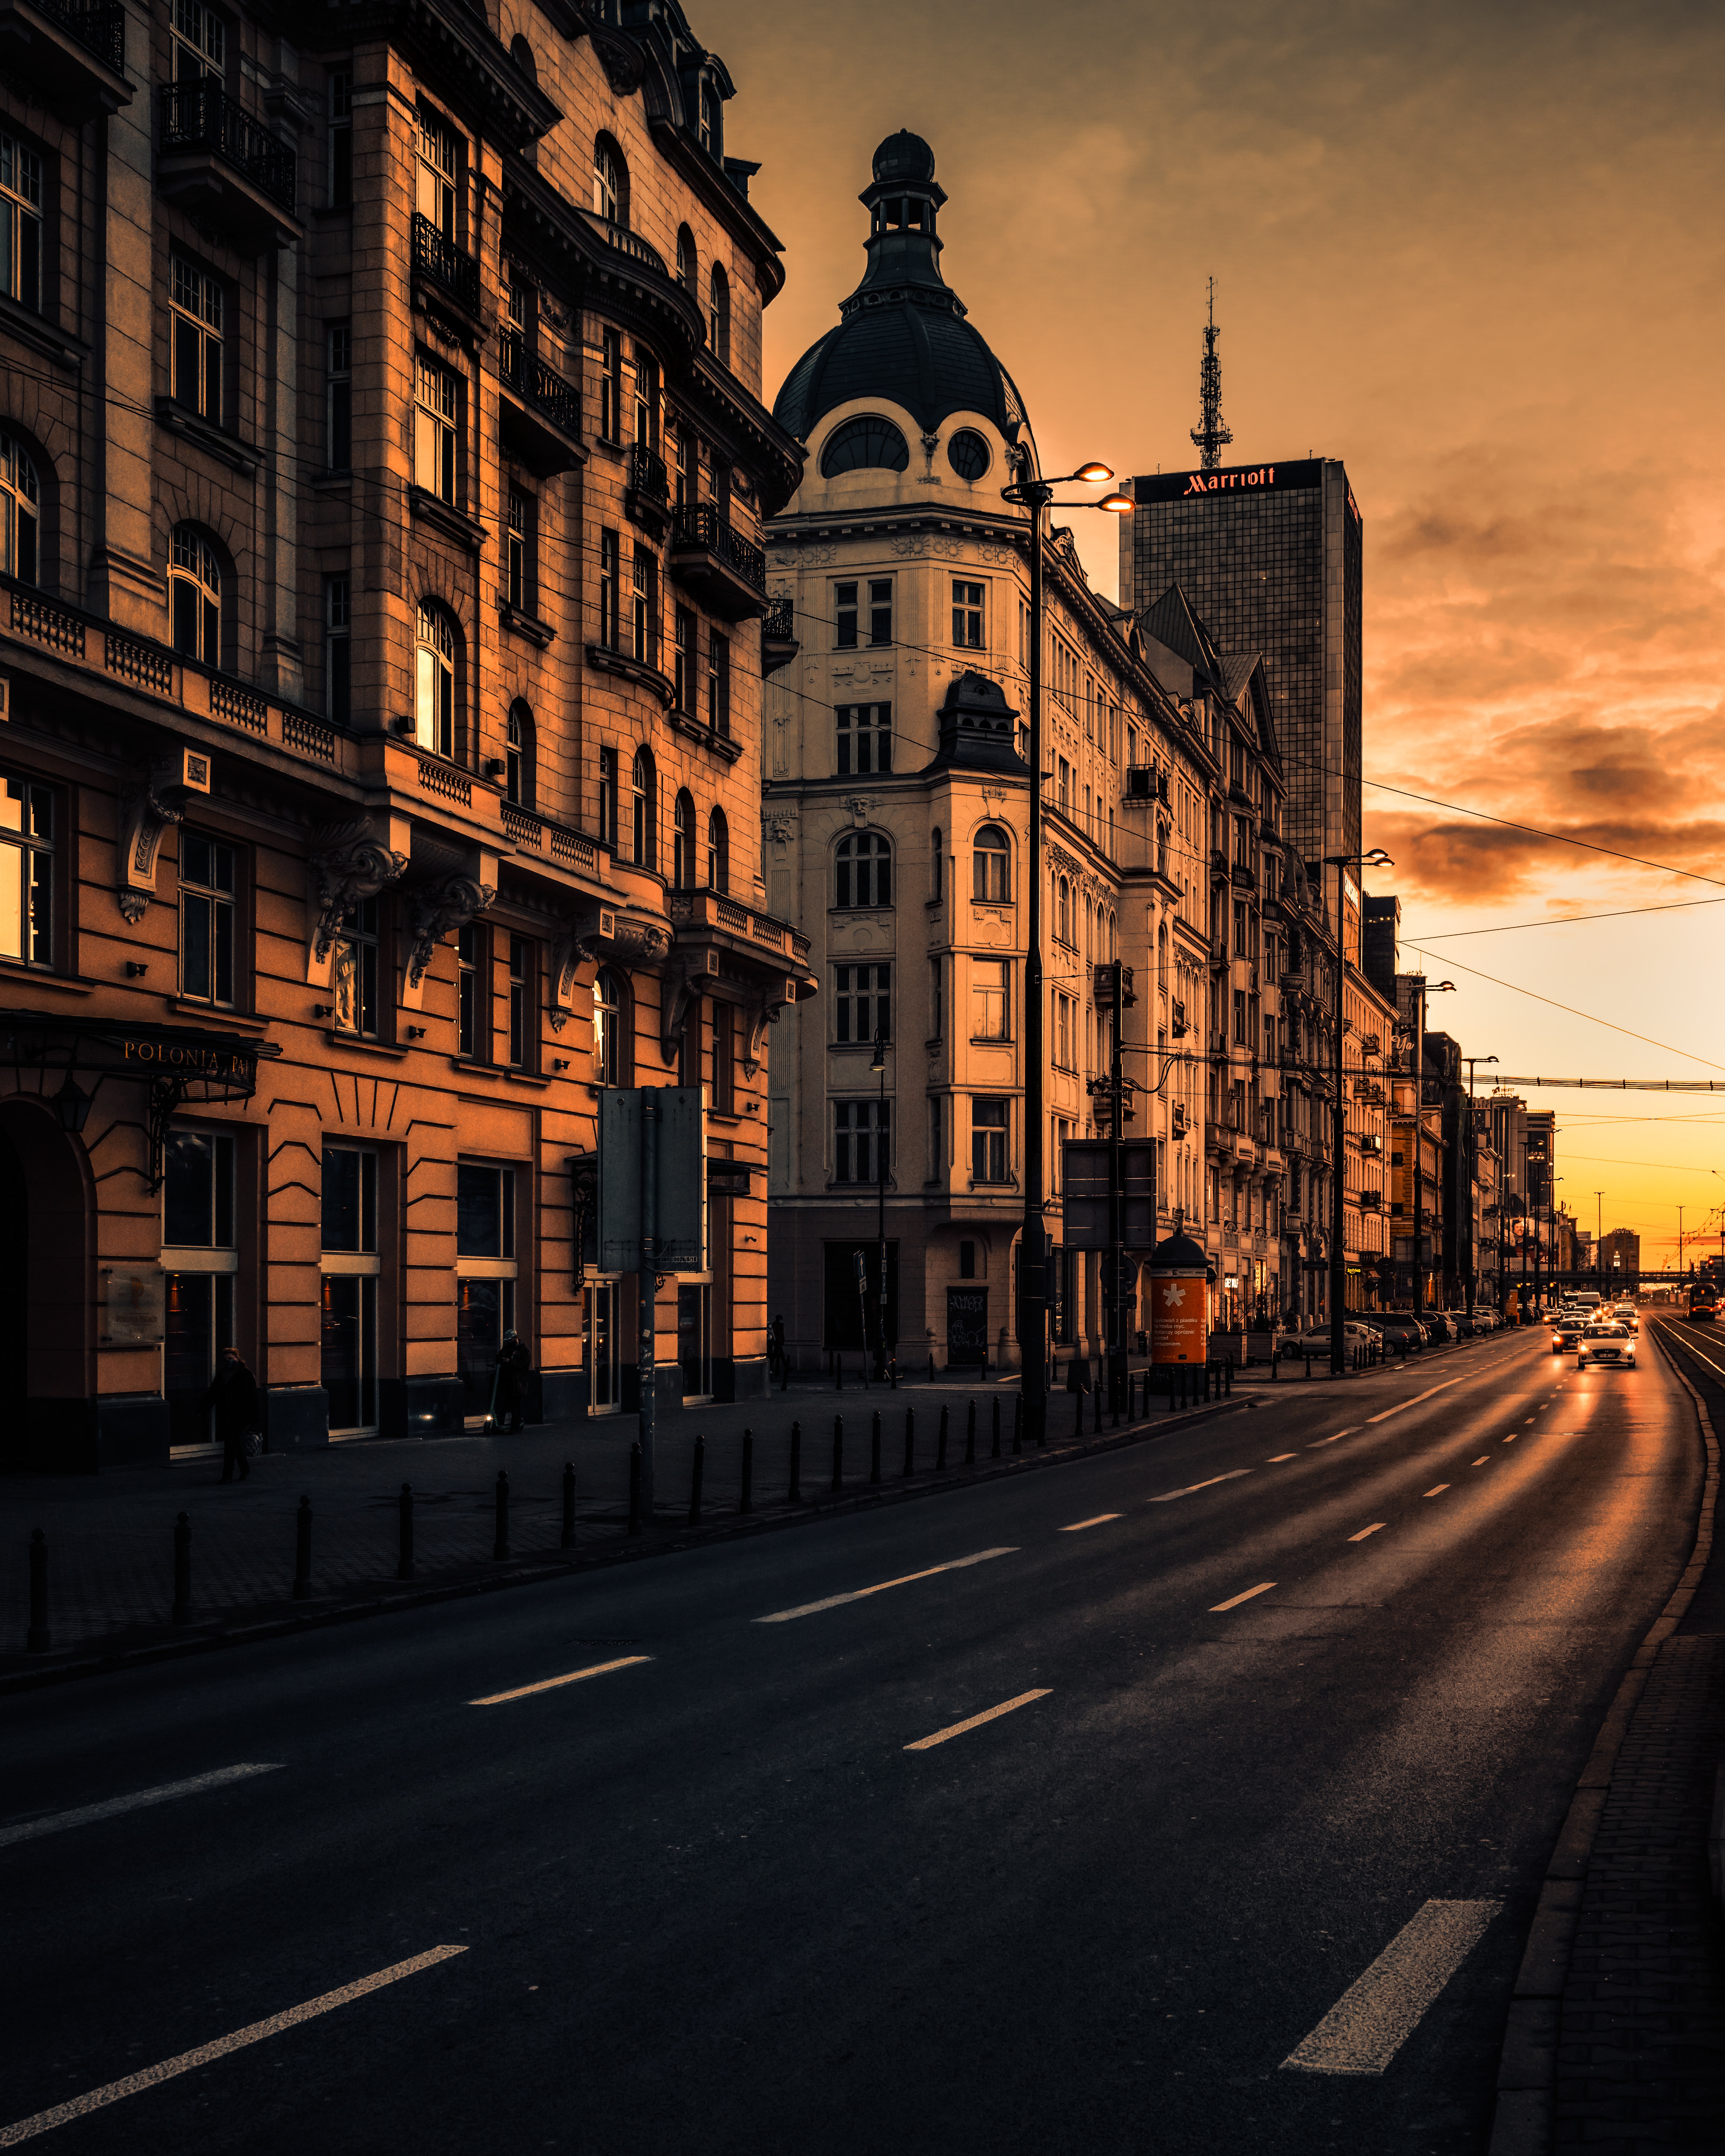 sunset, cities, architecture, cars, city, building, road